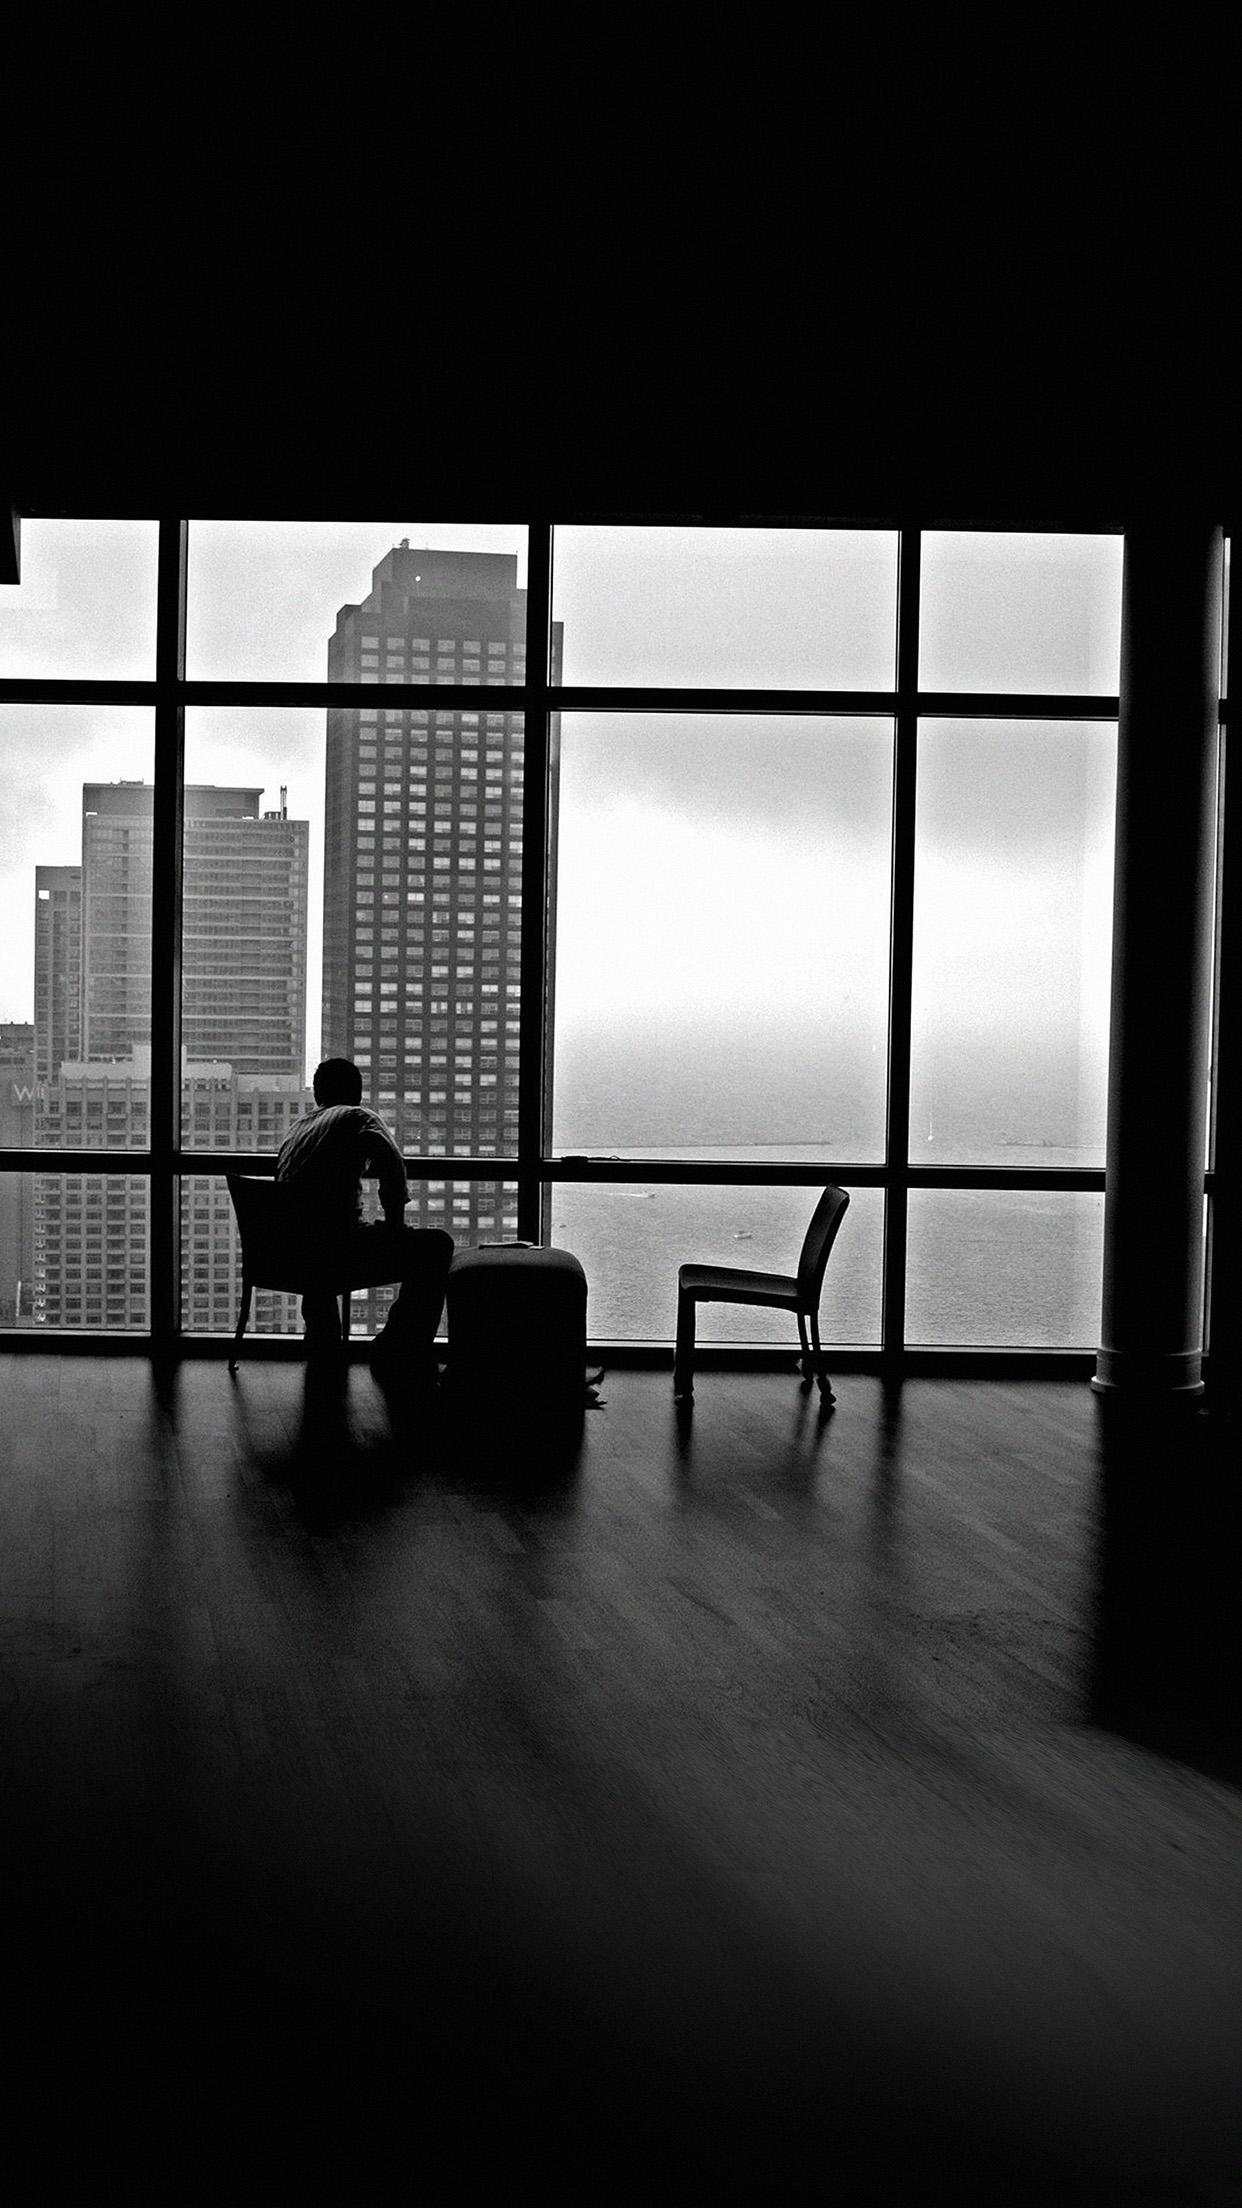 City View Window Architecture Black White Empty Room Android